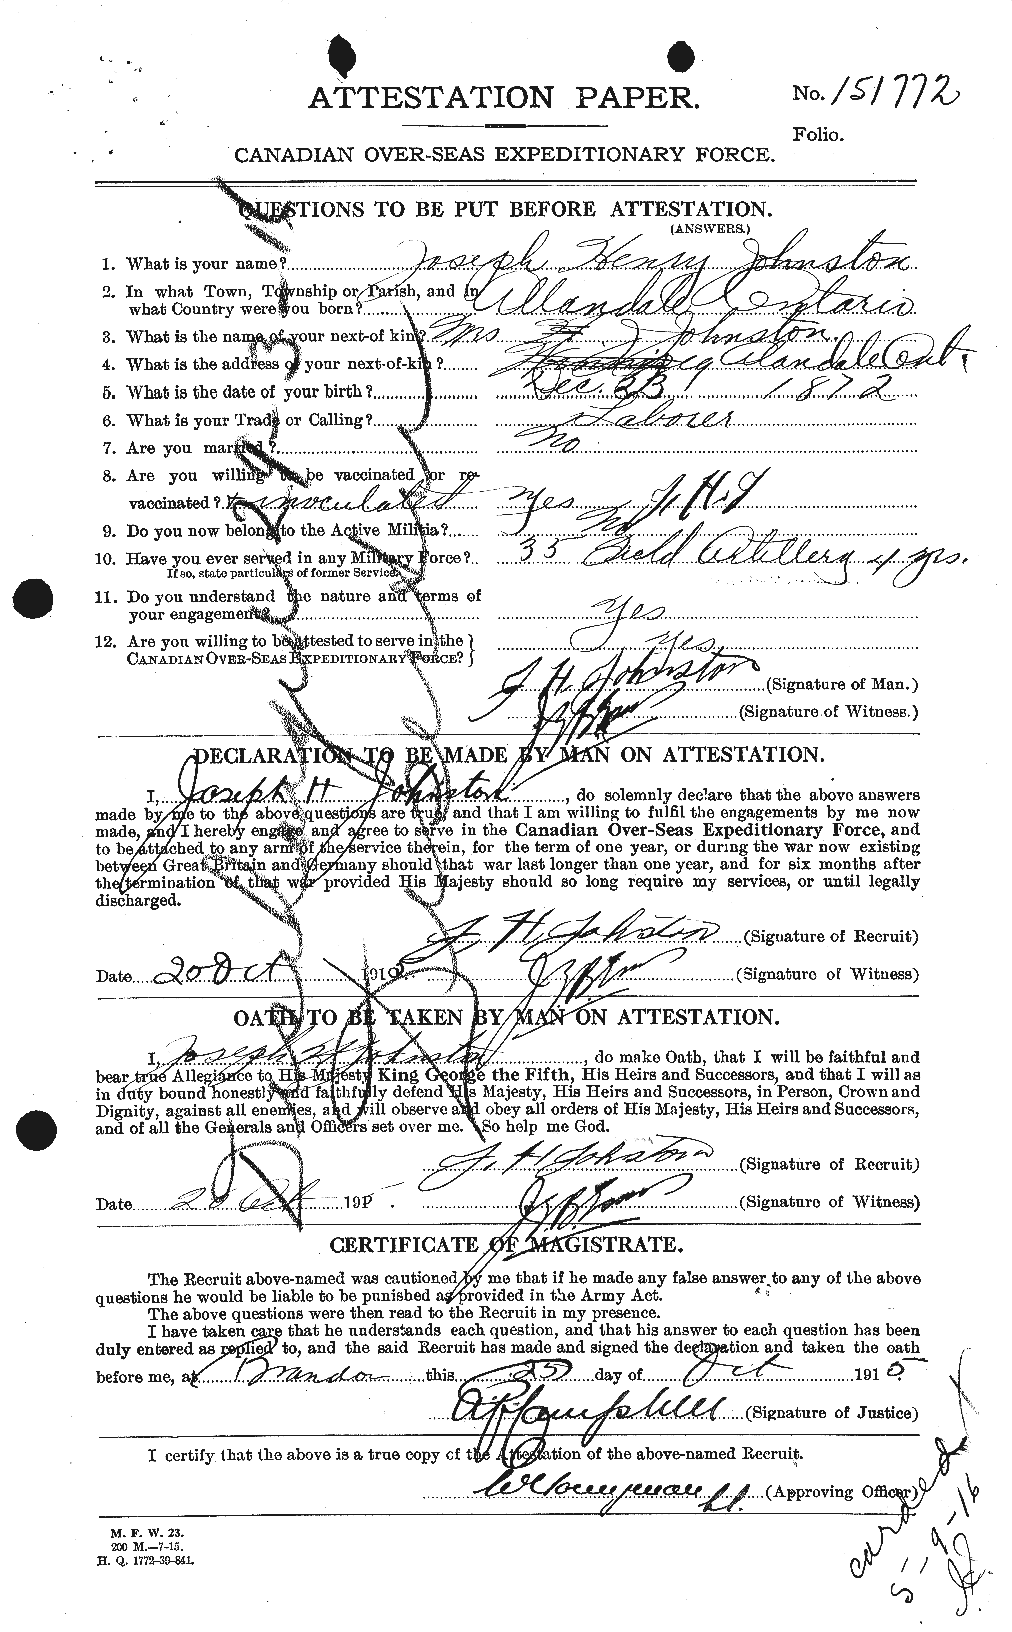 Personnel Records of the First World War - CEF 422909a